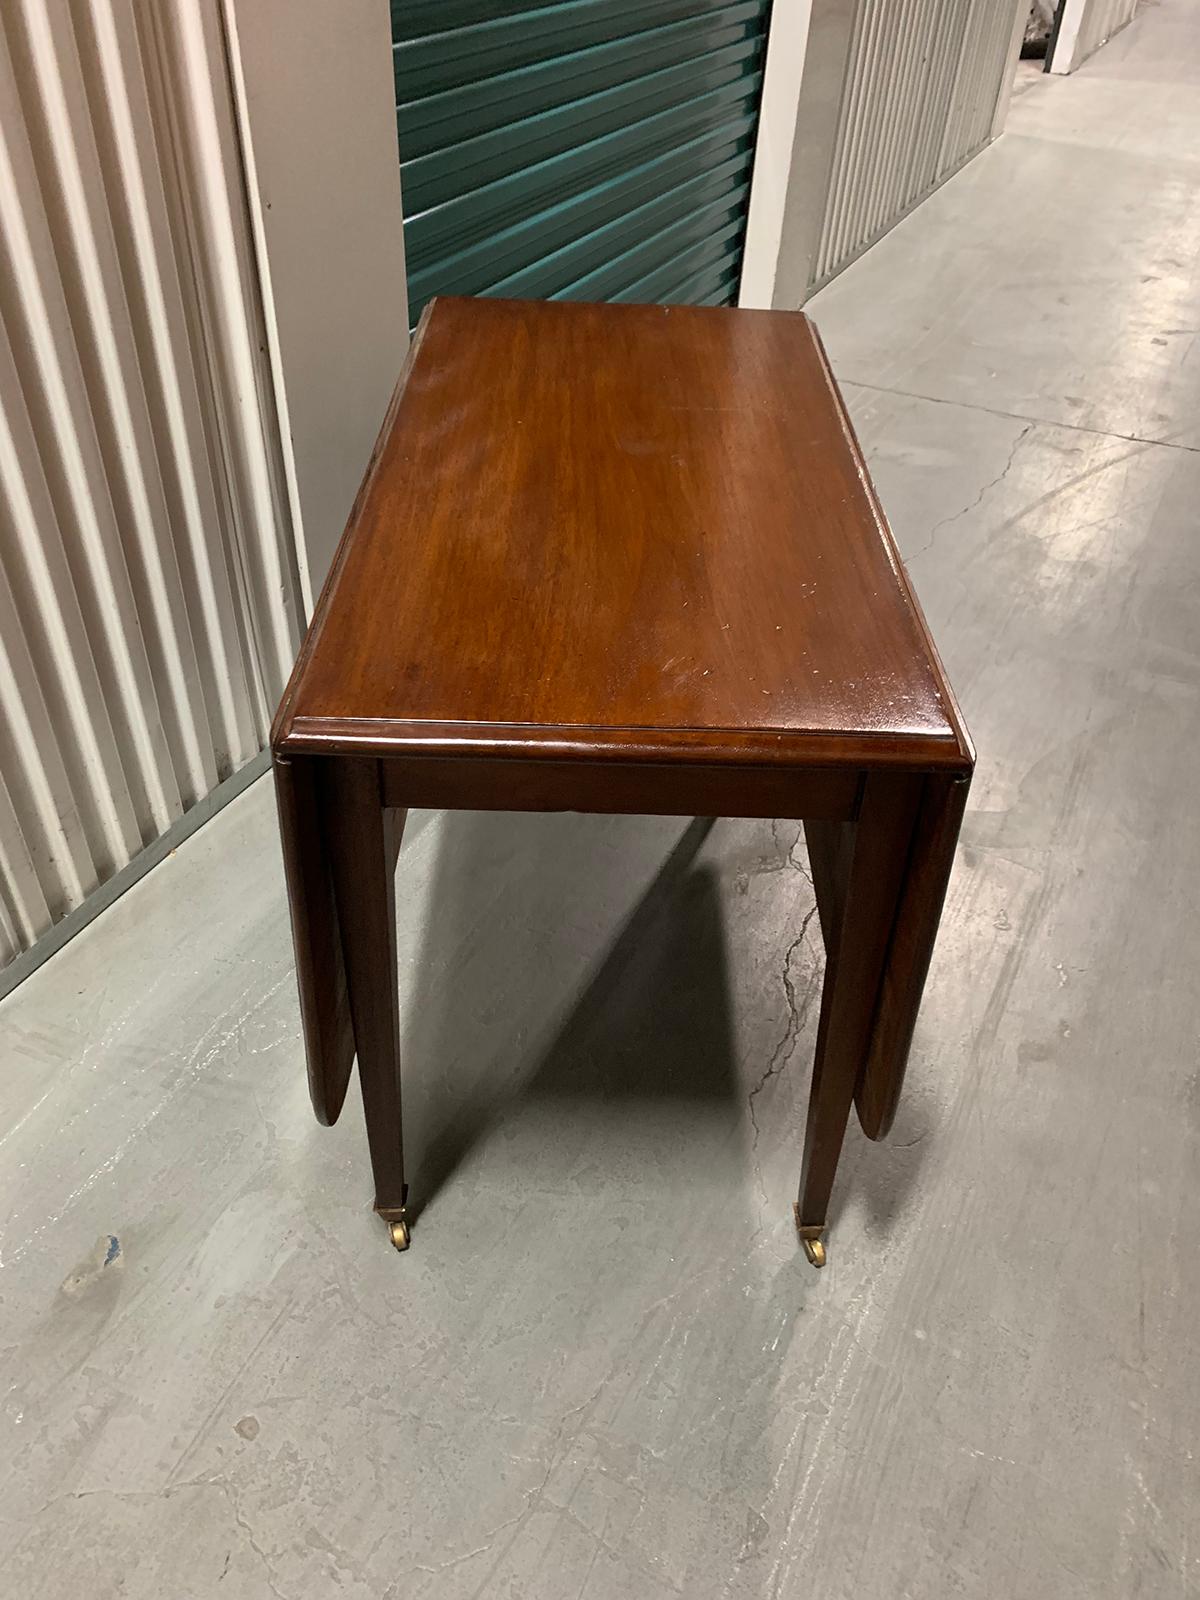 19th-20th Century Drop-Leaf Table For Sale 1